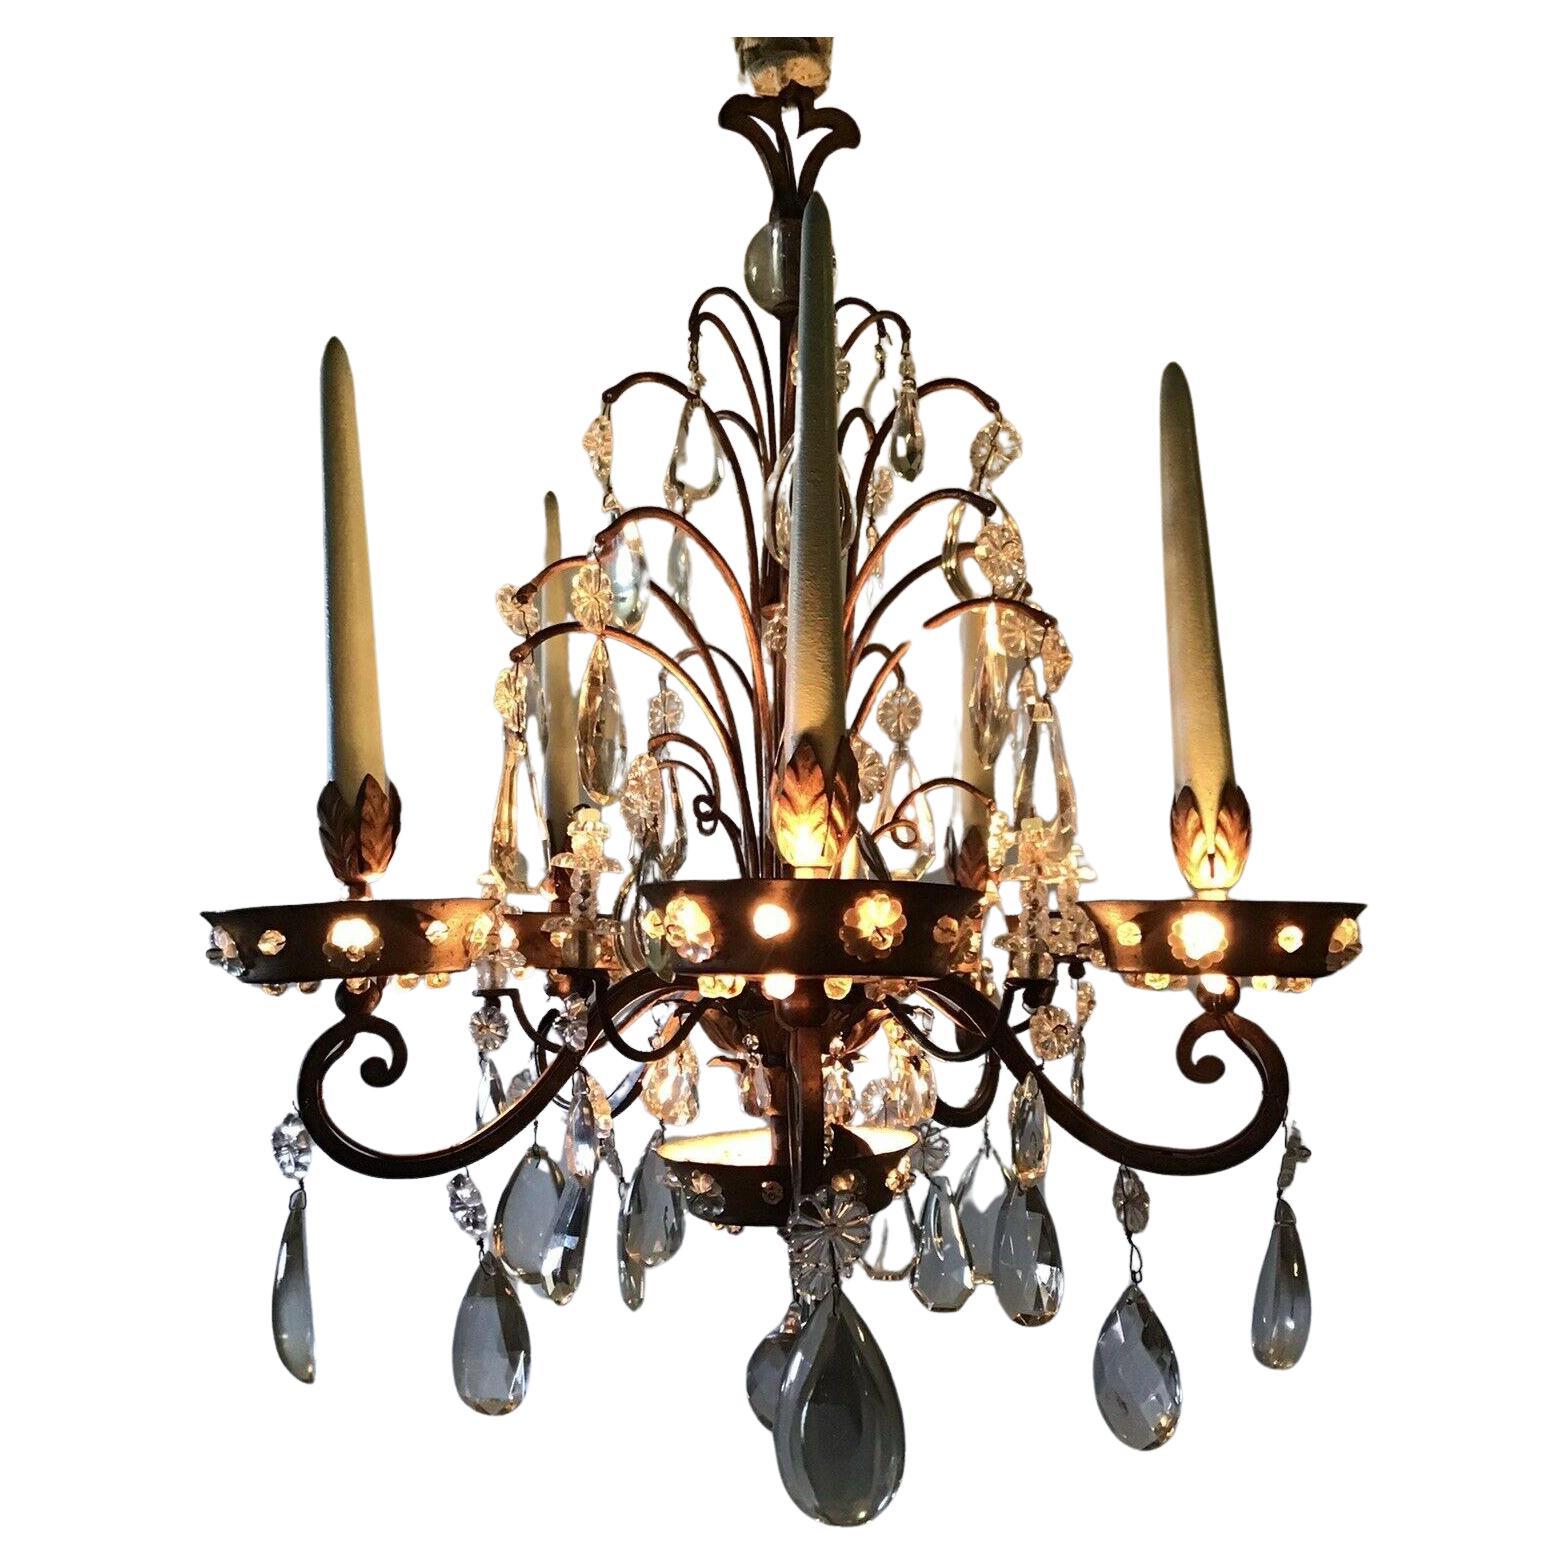 1920s French Louis XV Rococo style of the 18thc Chandelier attrib. Maison Bagues In Good Condition For Sale In Opa Locka, FL